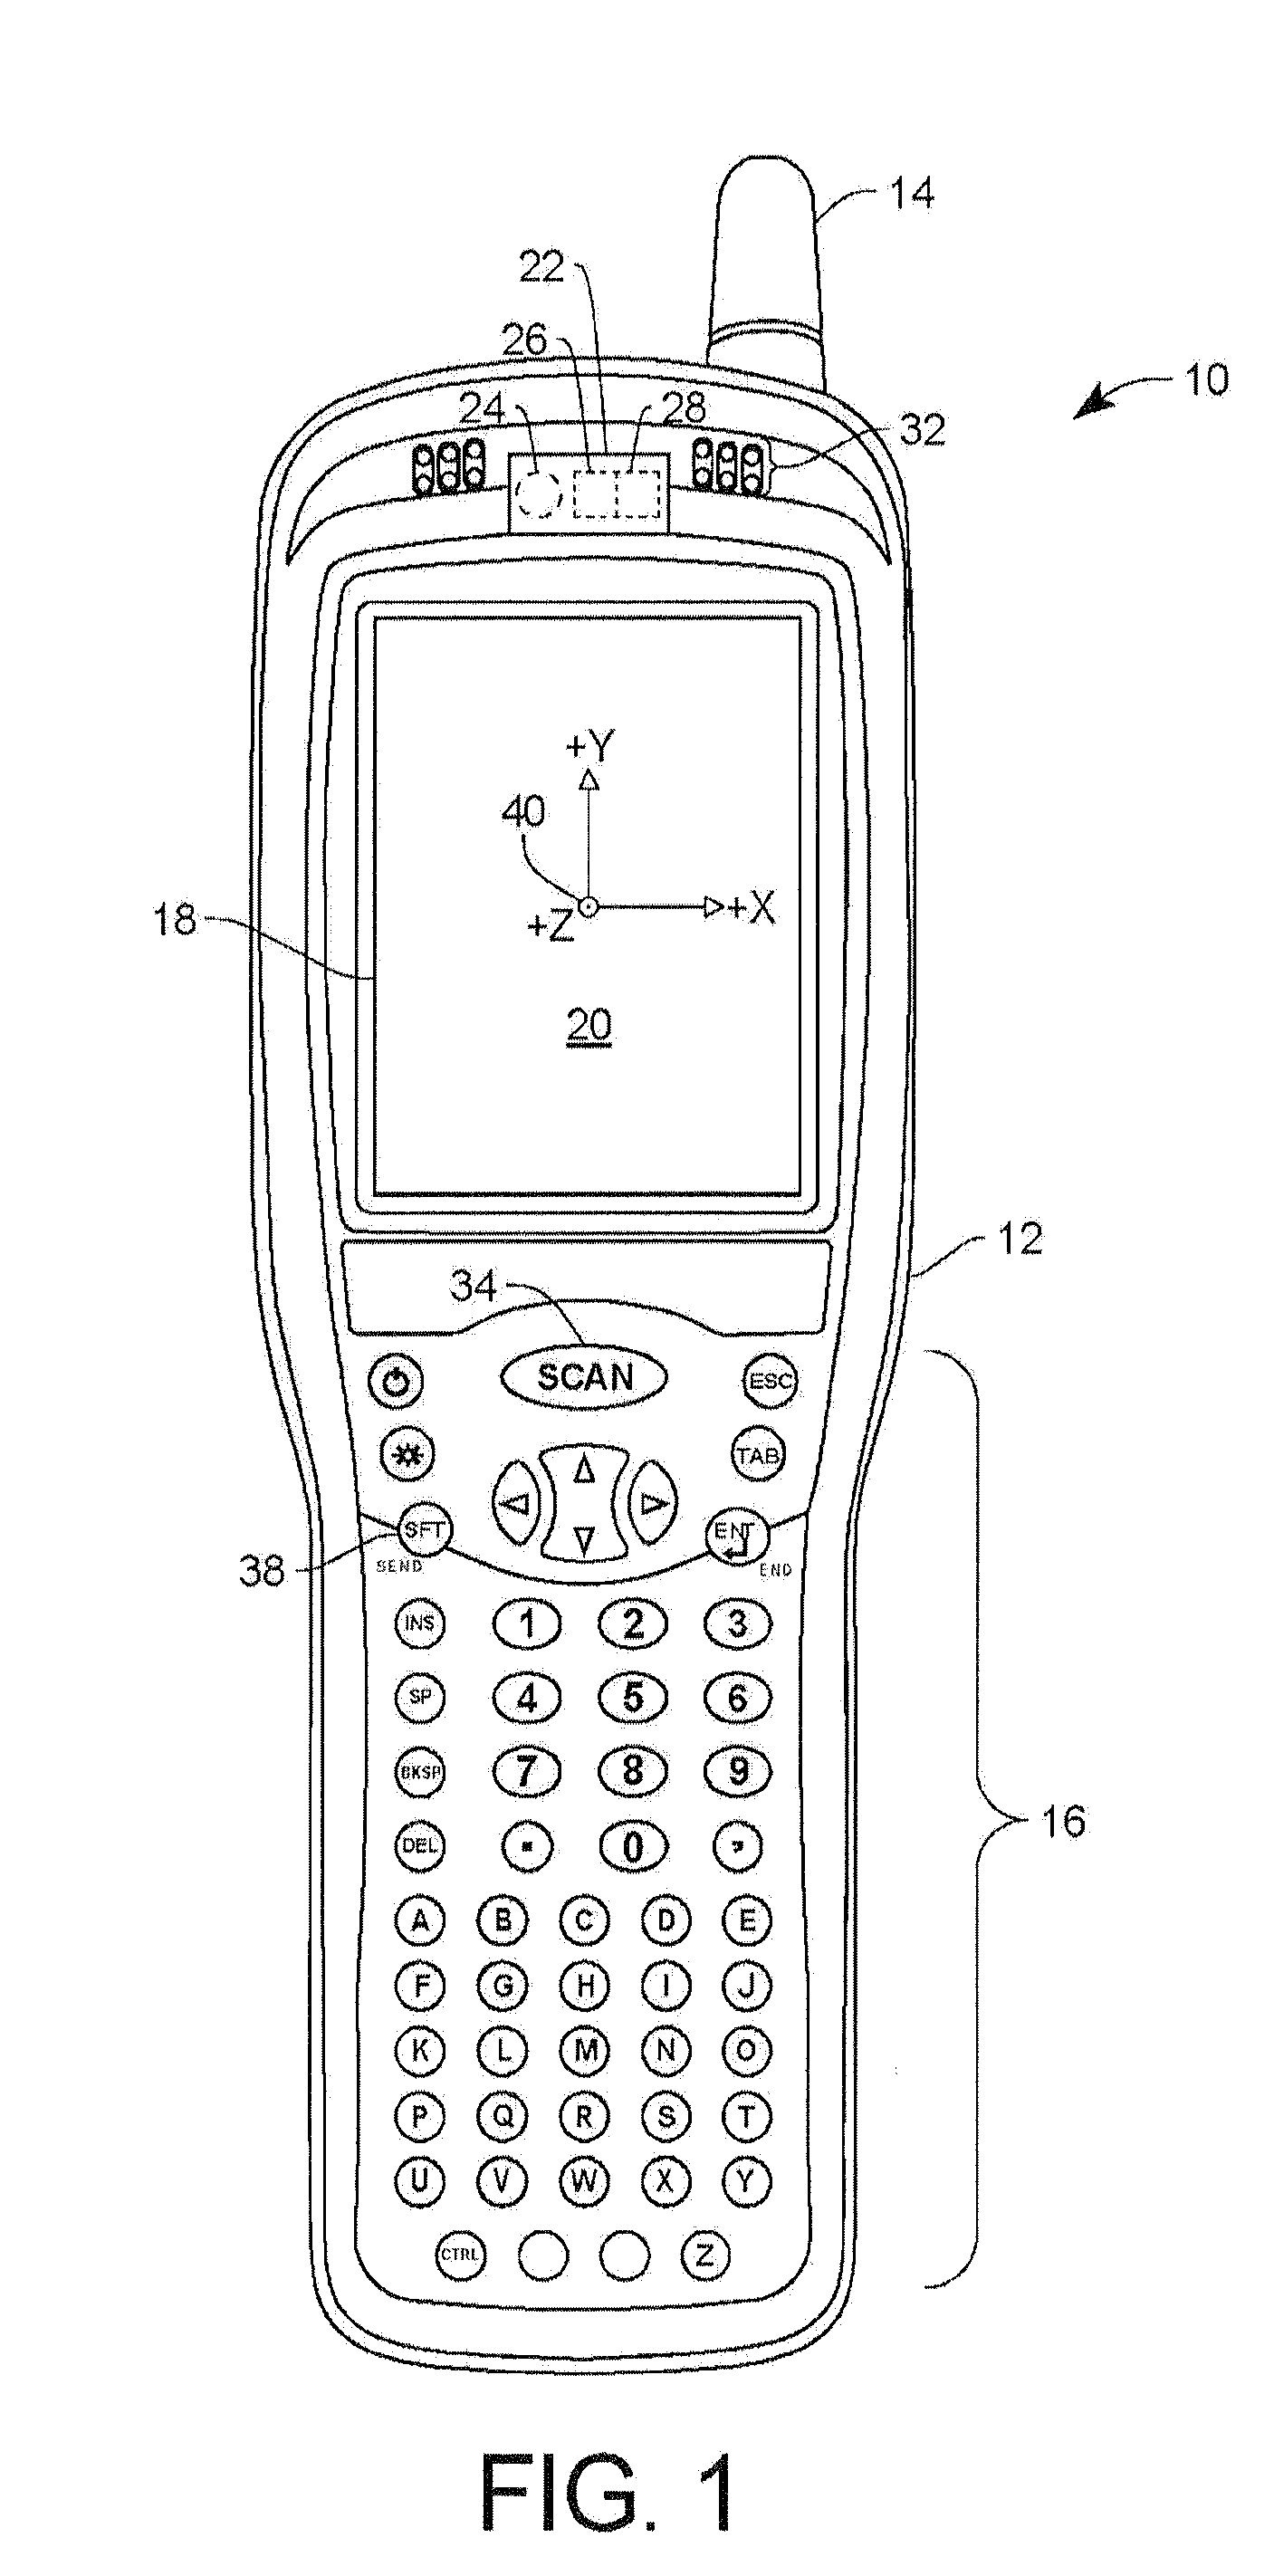 Power management scheme for portable data collection devices utilizing location and position sensors